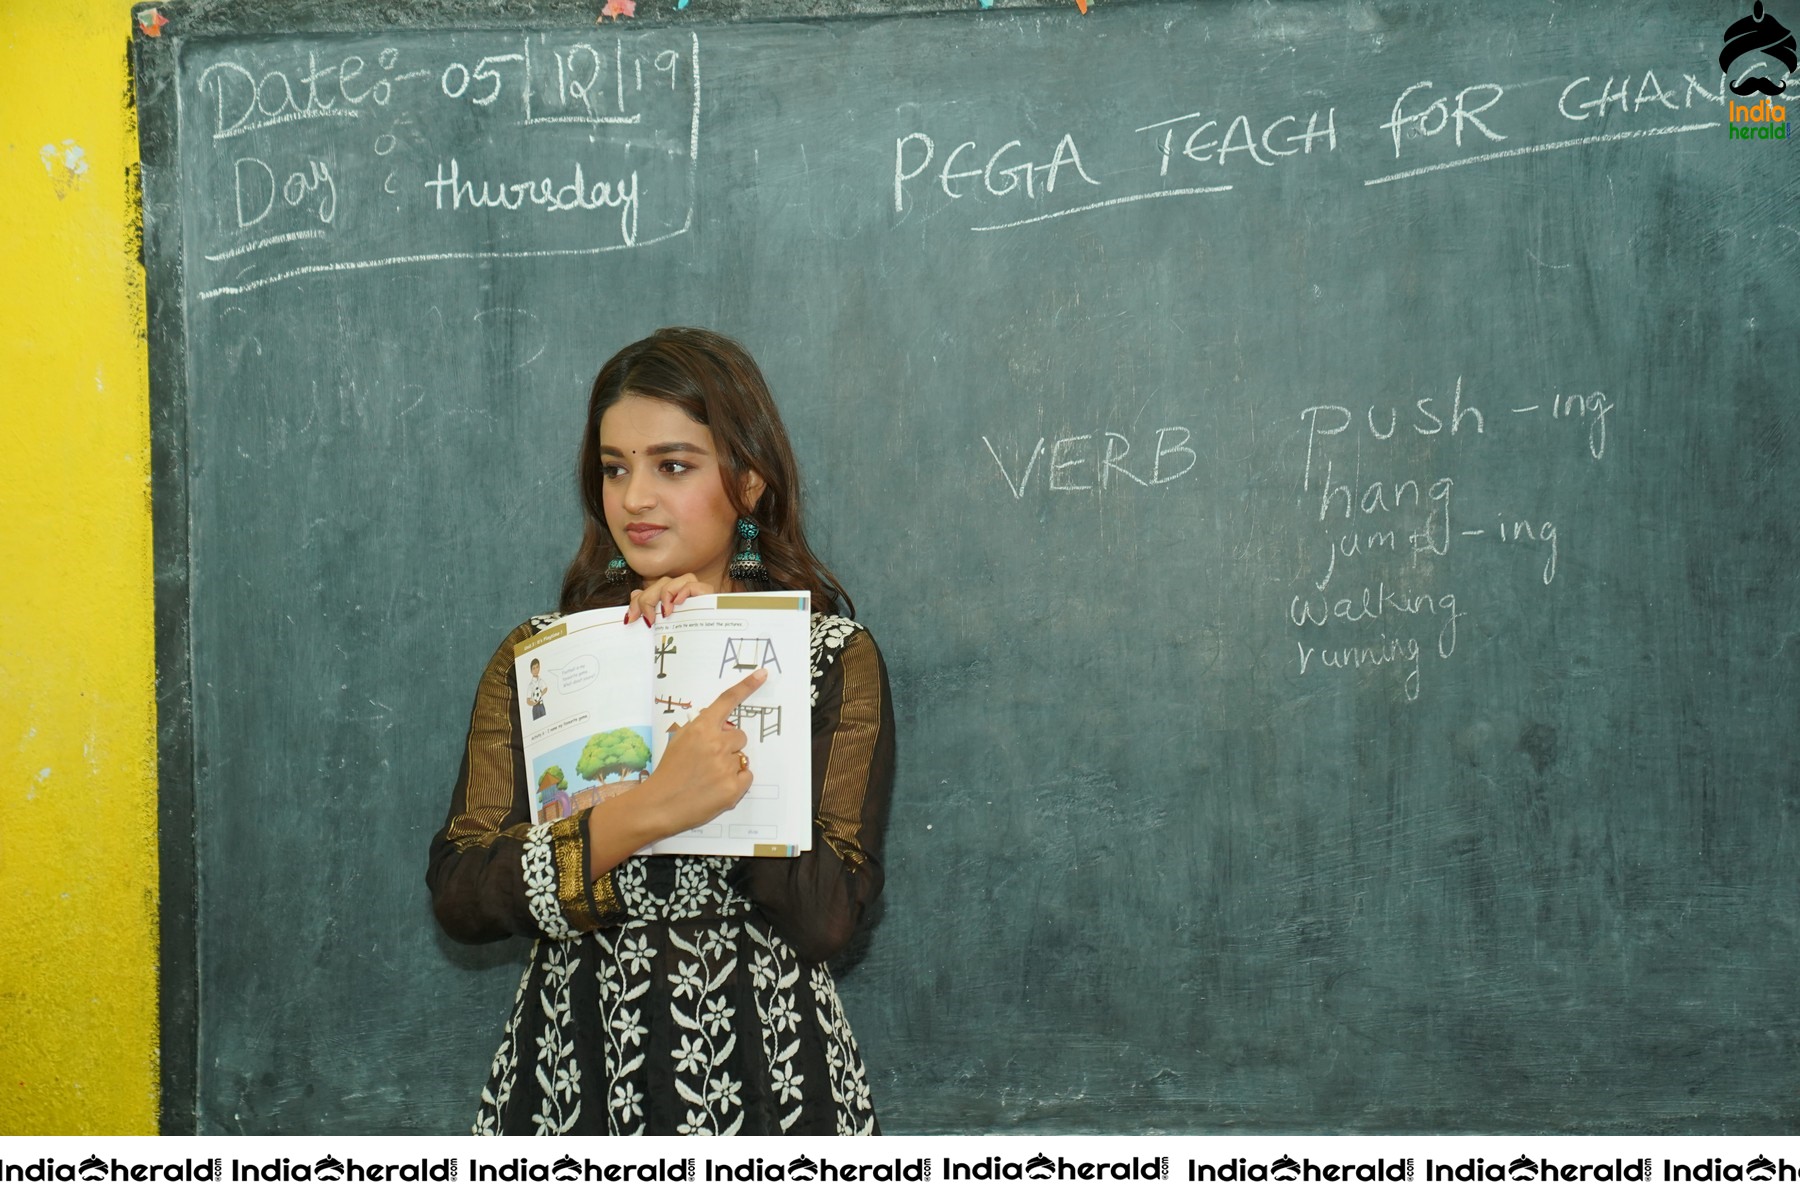 Nidhhi Agerwal Teaches English To Pega Teach For Change Supported Kids Set 1